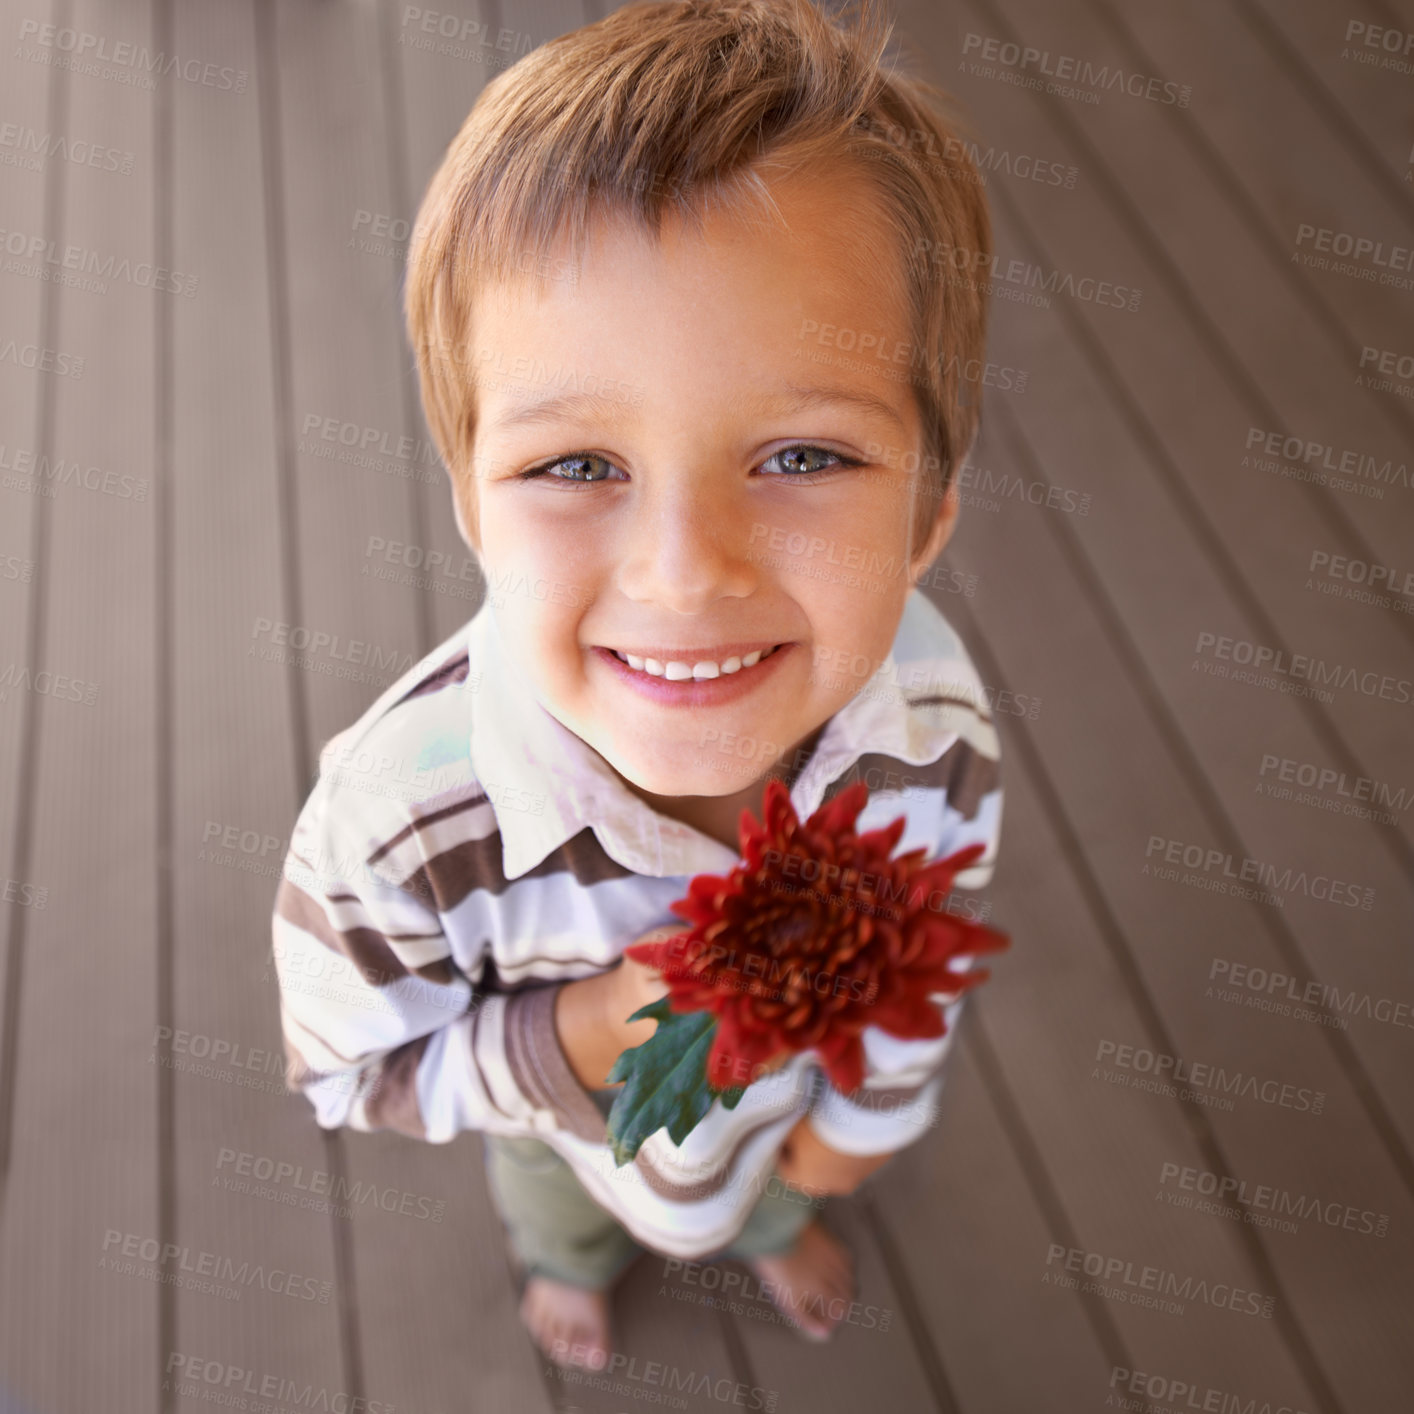 Buy stock photo Shot of a cute little boy holding a red flower